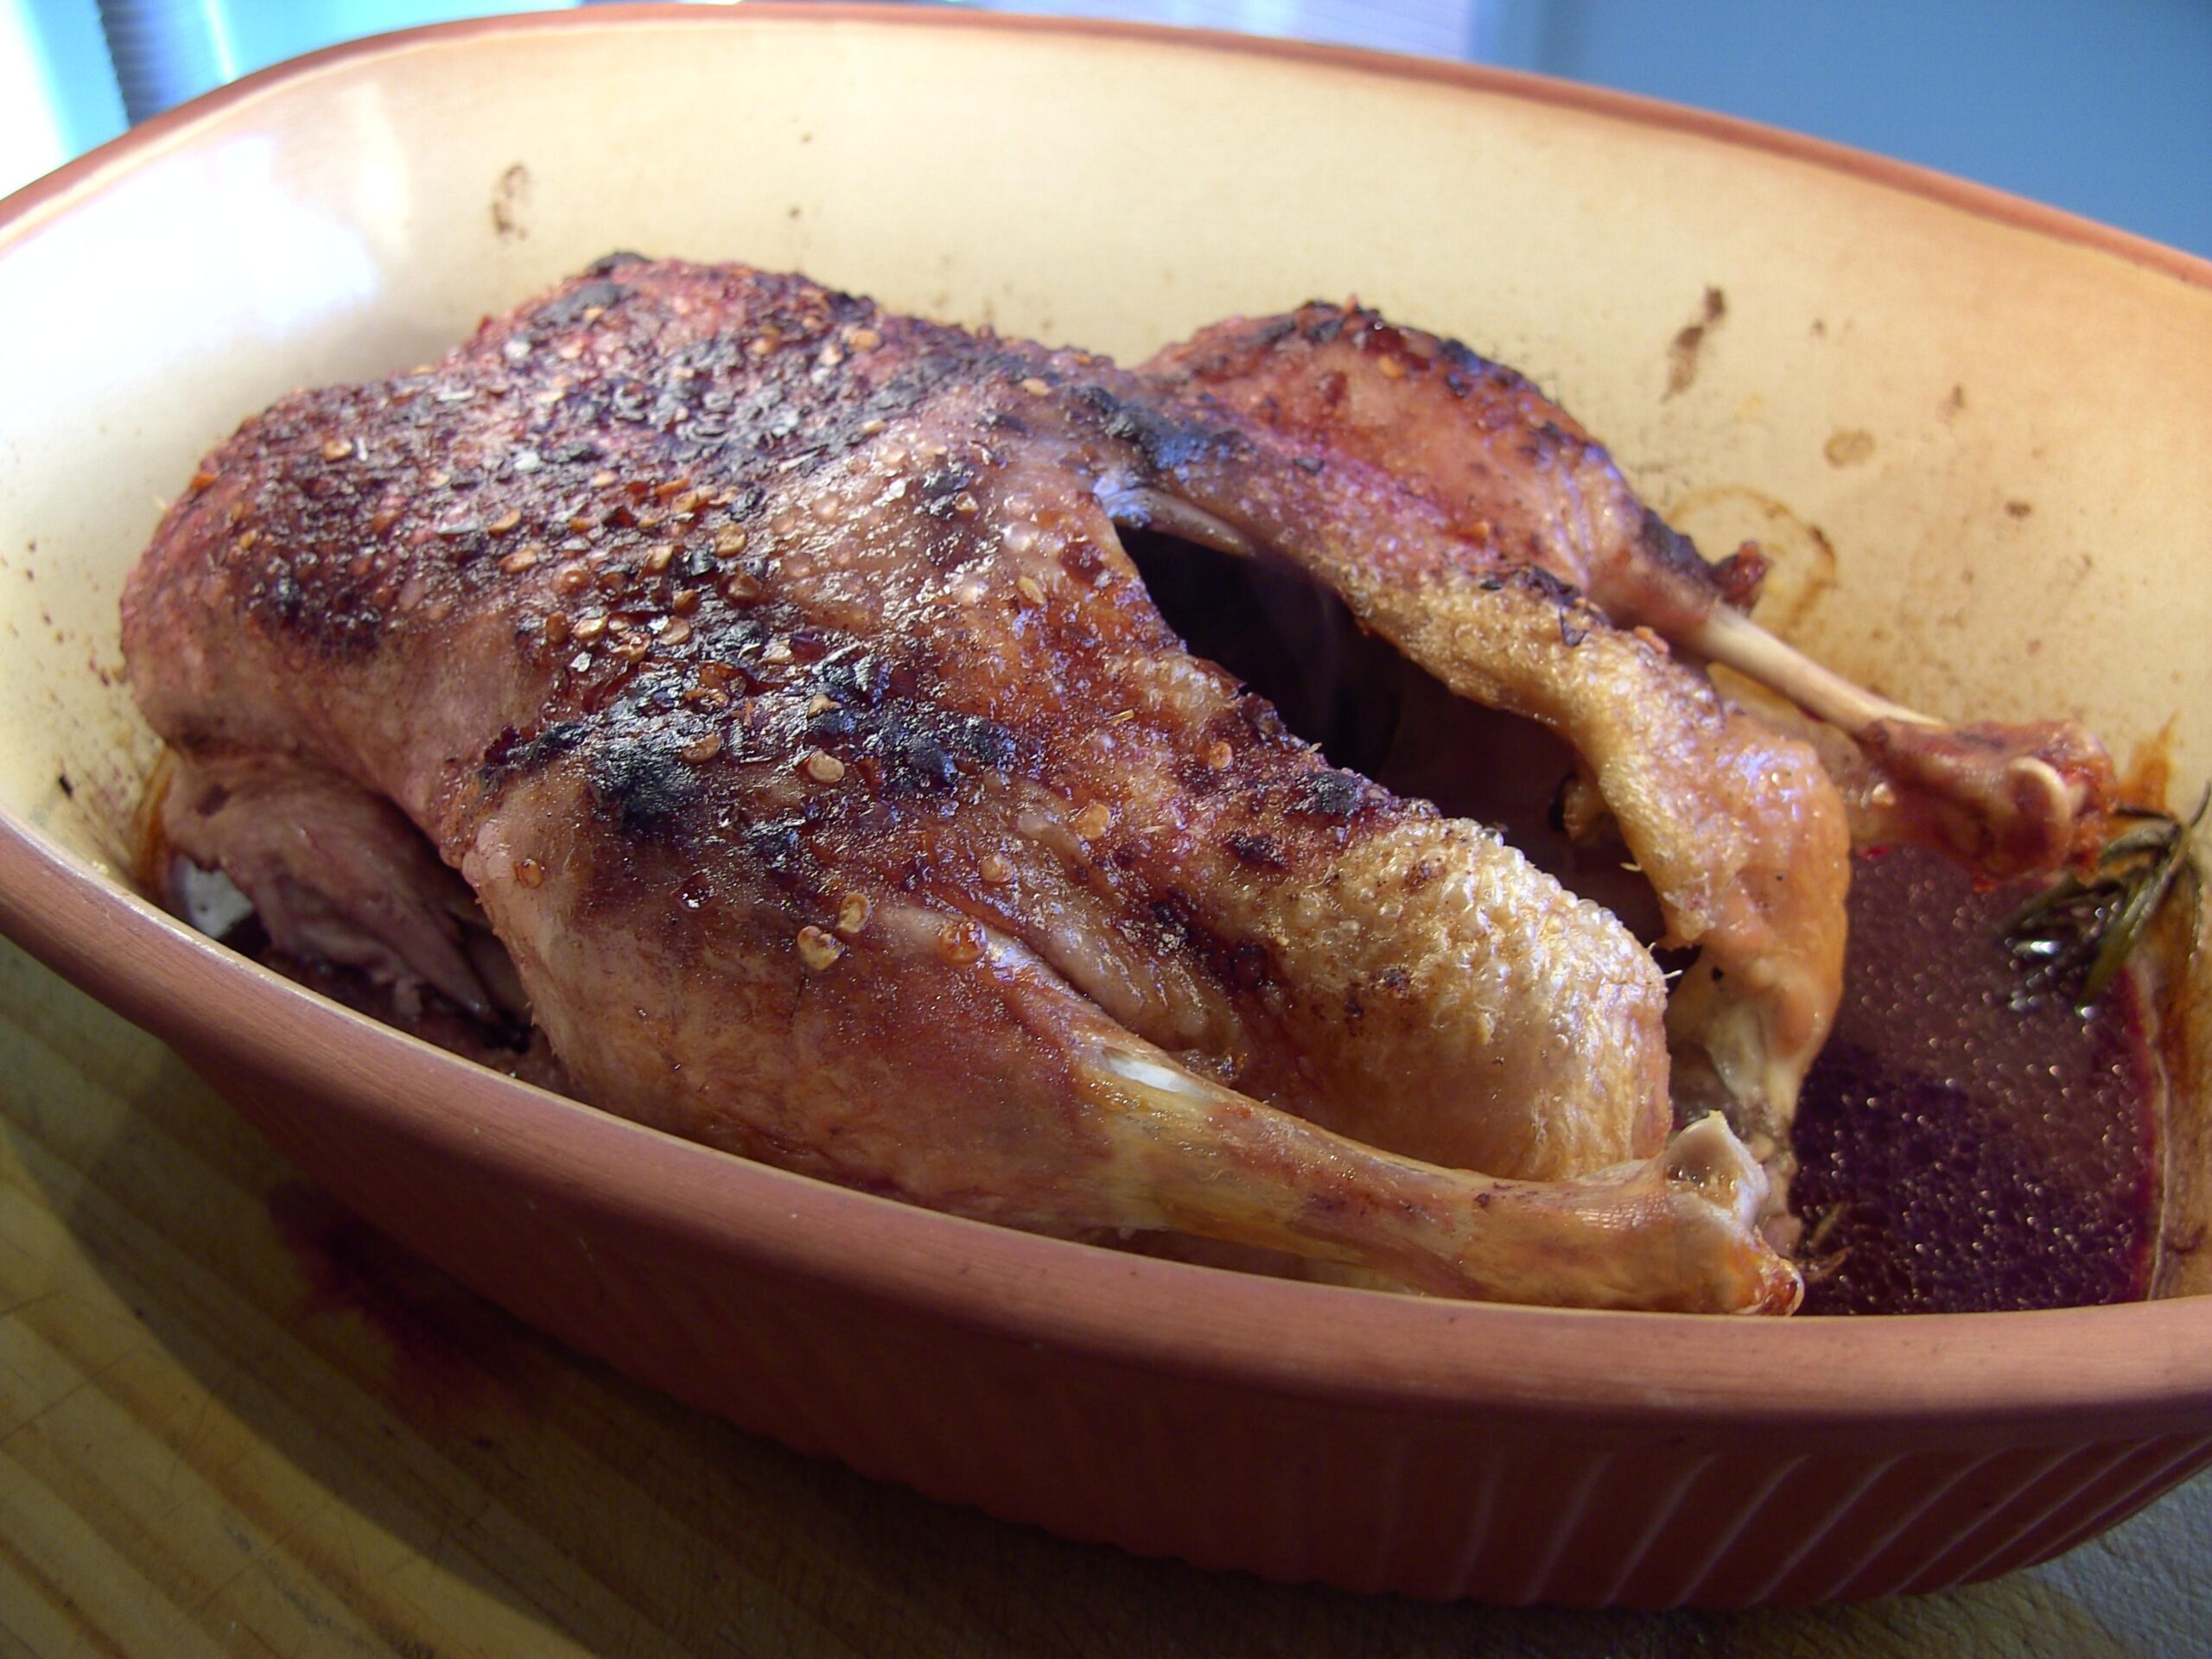  The rich, deep color of the red wine sauce perfectly complements the tender, crispy skin of the duck leg